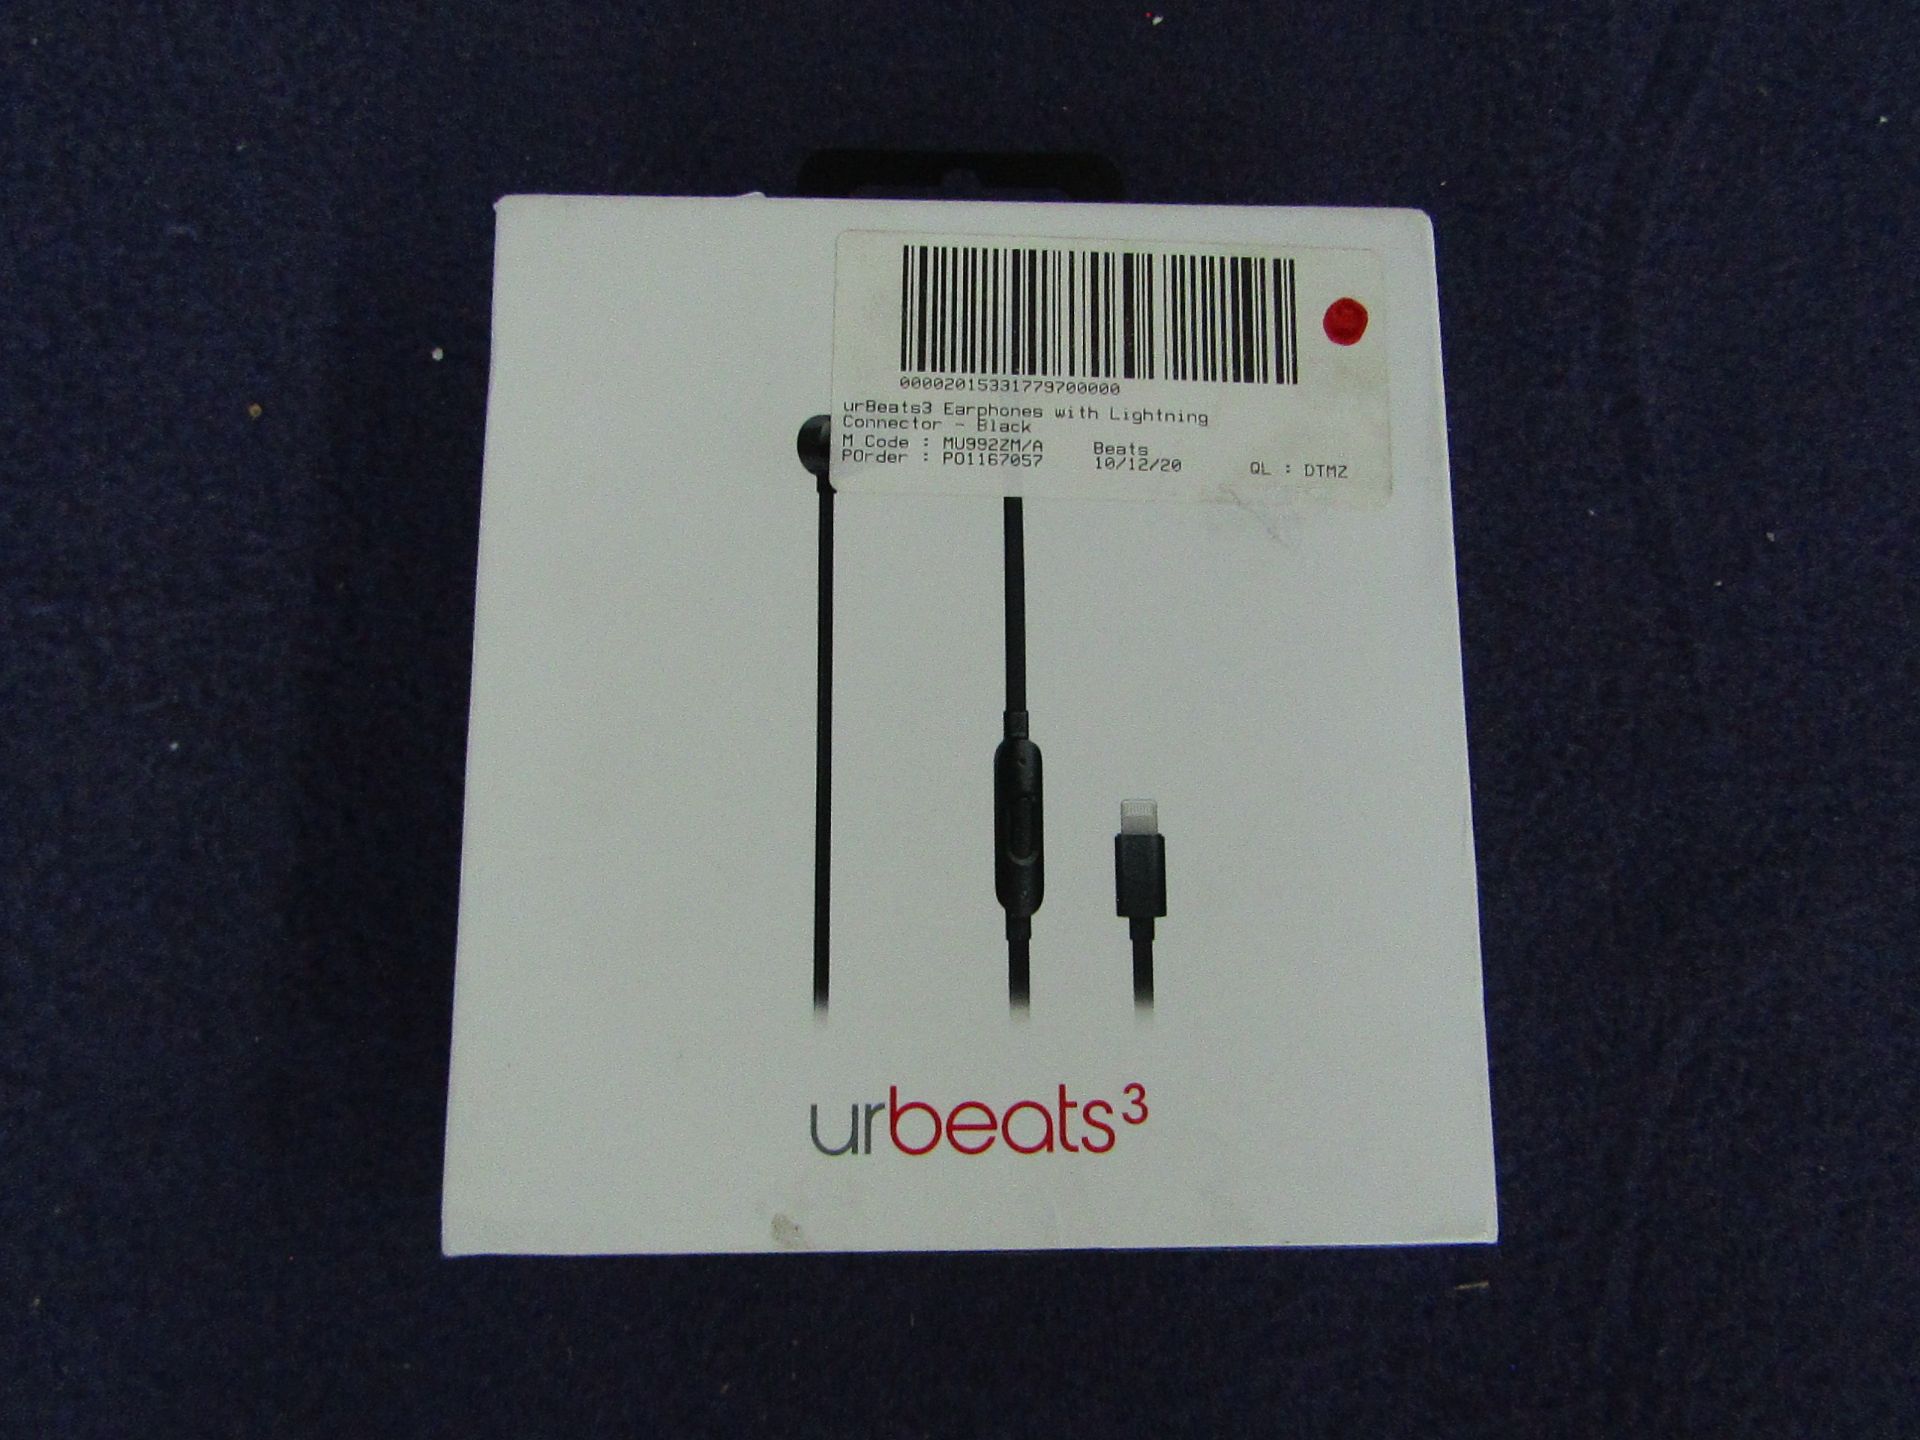 Beats By Dre - Ur Beats3 Earphones With Lightning Connector-Black - Tested Wiorking But Only One